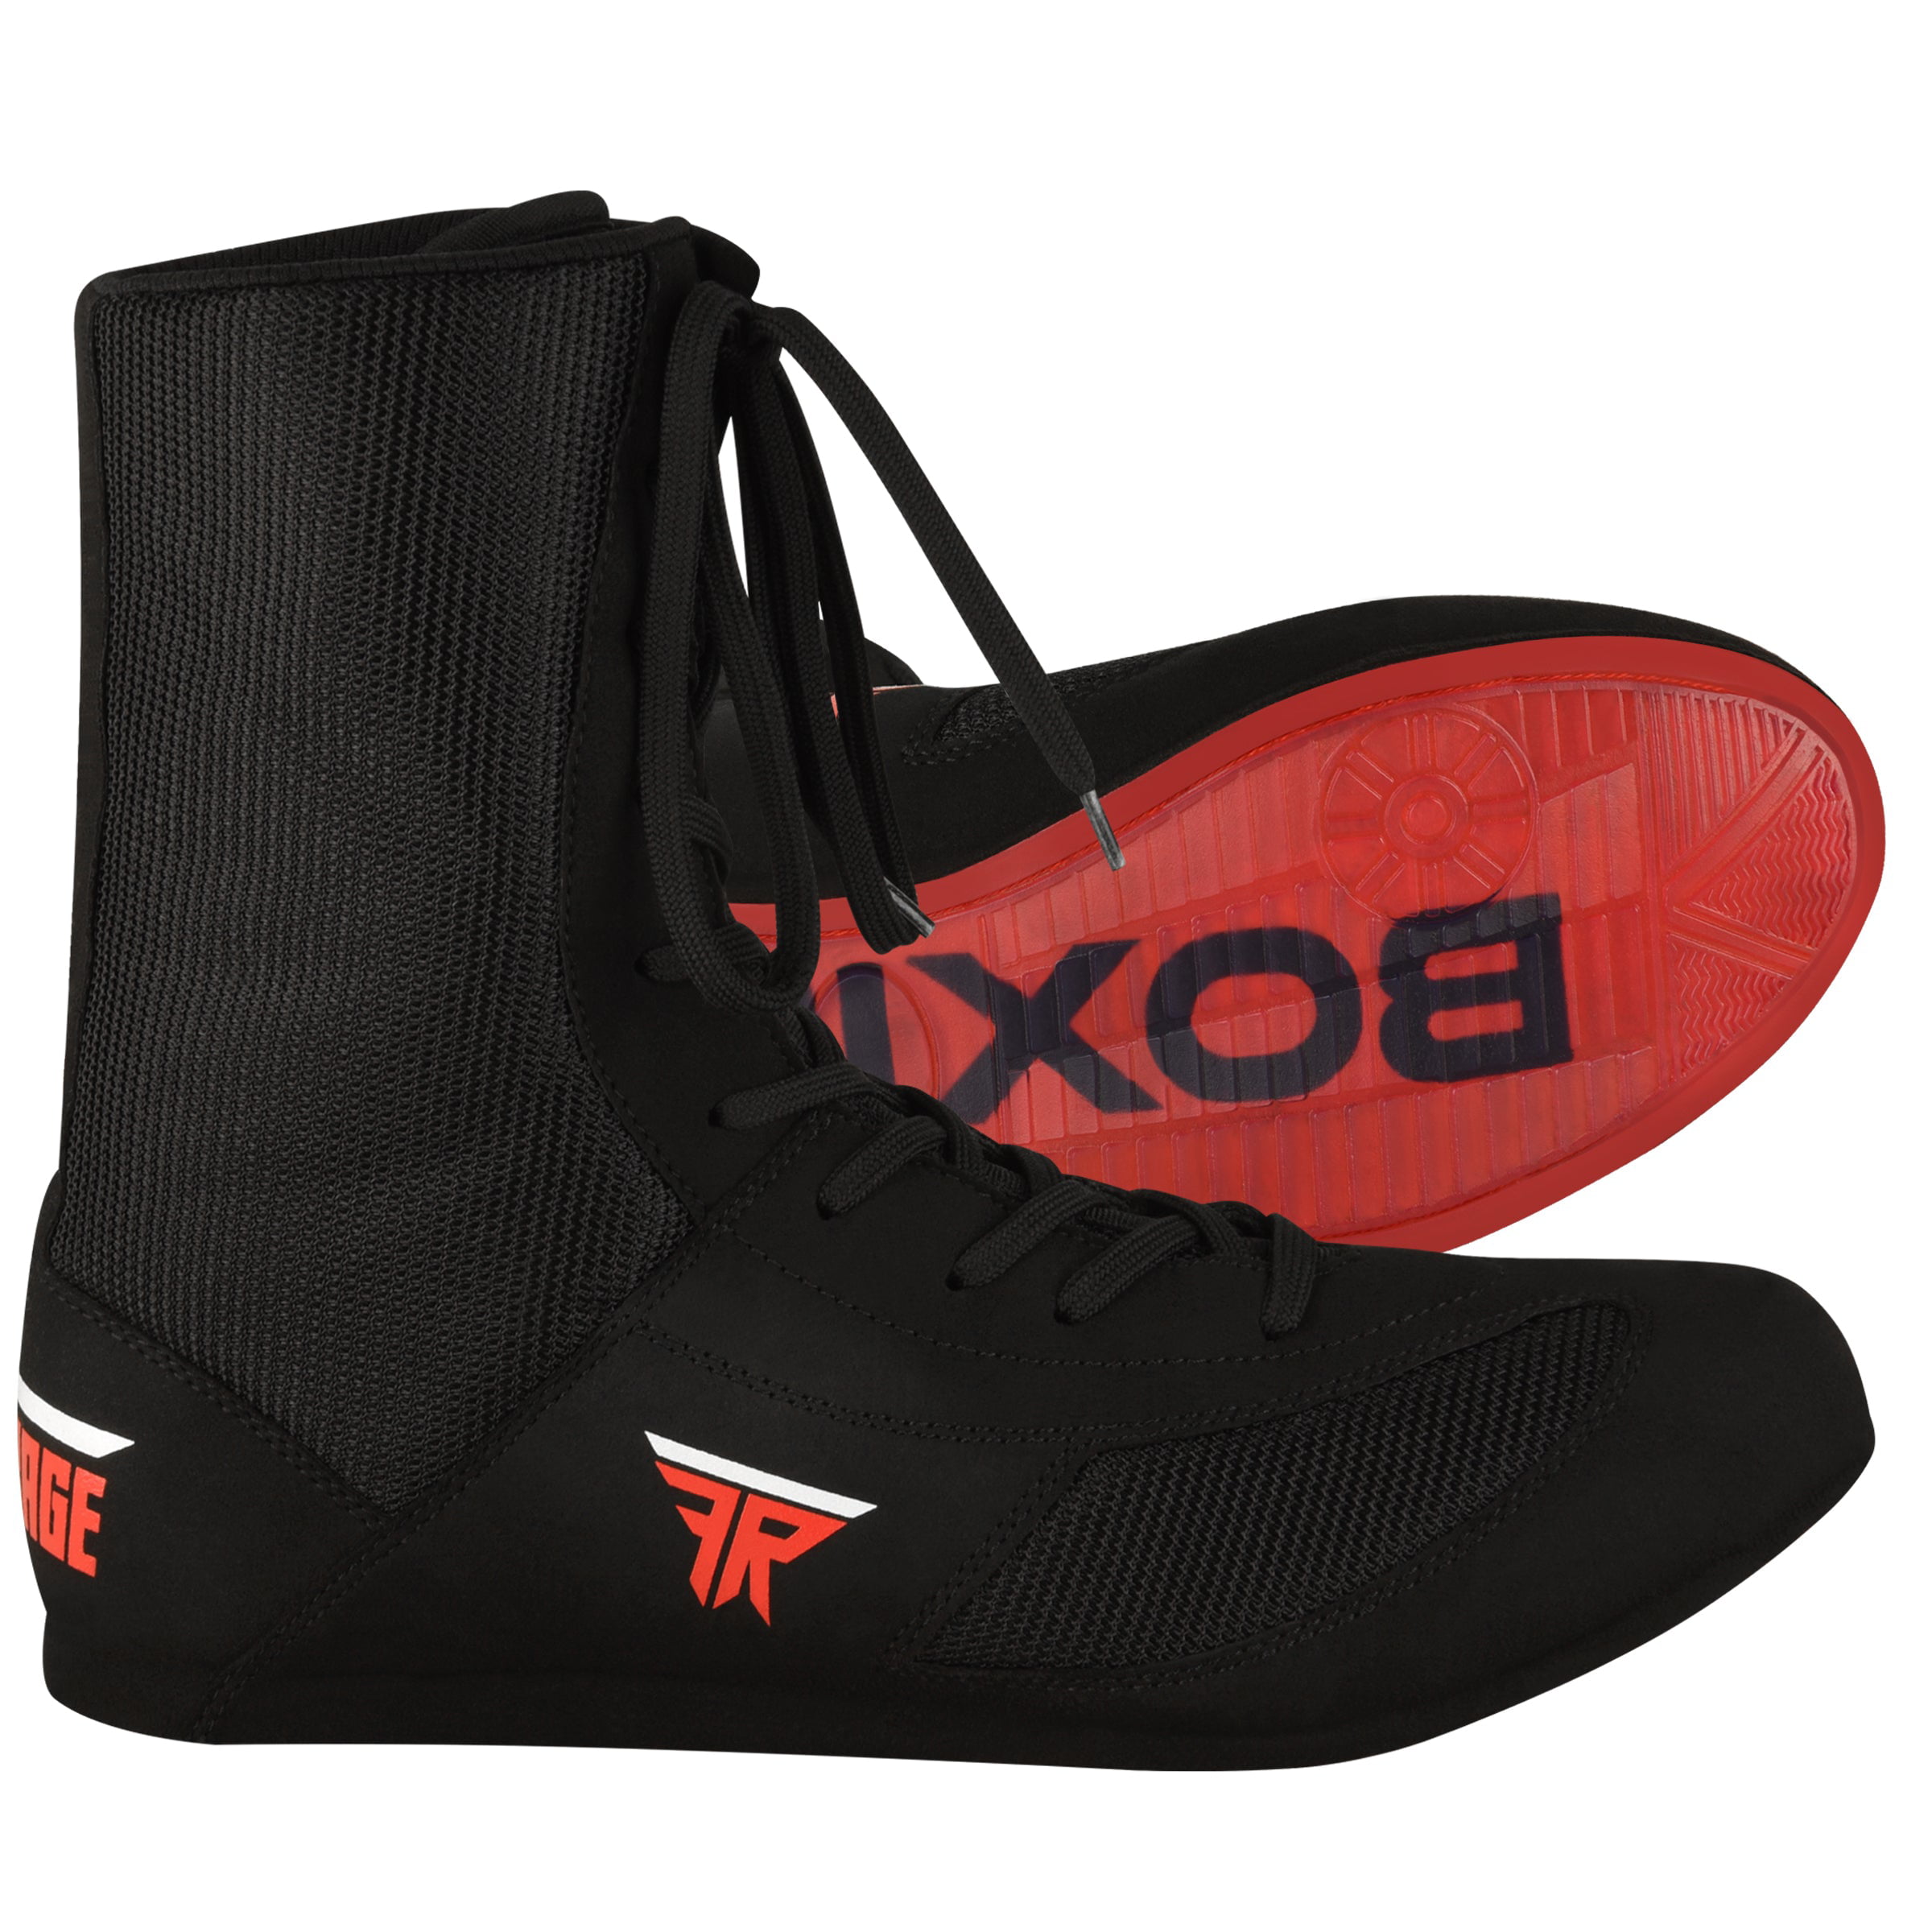 UFC Fight Boxing Shoes with Breathable and Anti-Slipping Technology for Athletic Sports Wrestling 